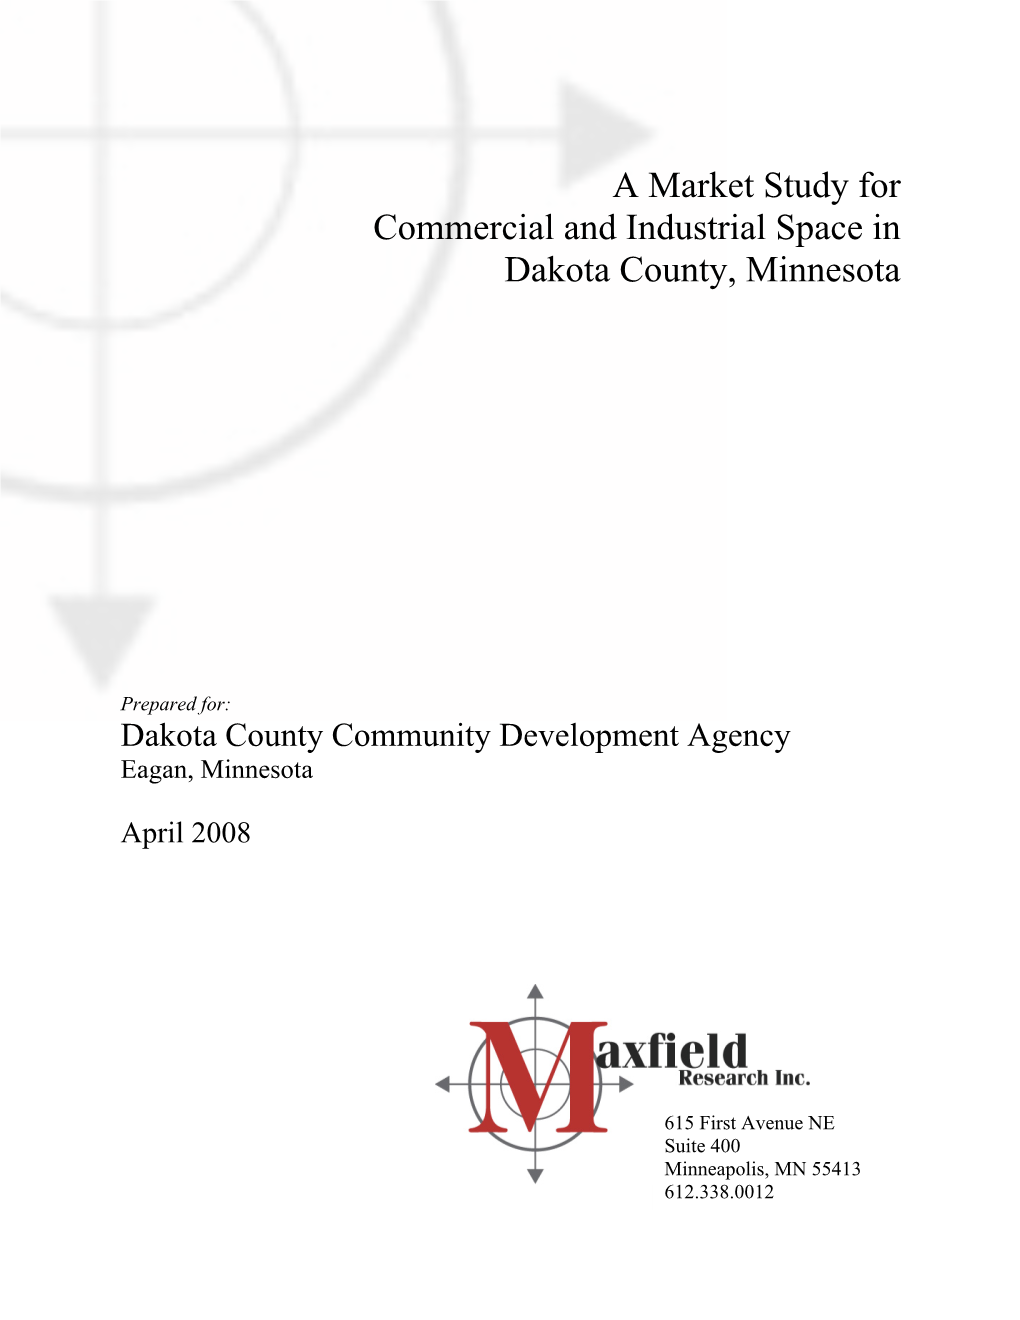 A Market Study for Commercial and Industrial Space in Dakota County, Minnesota